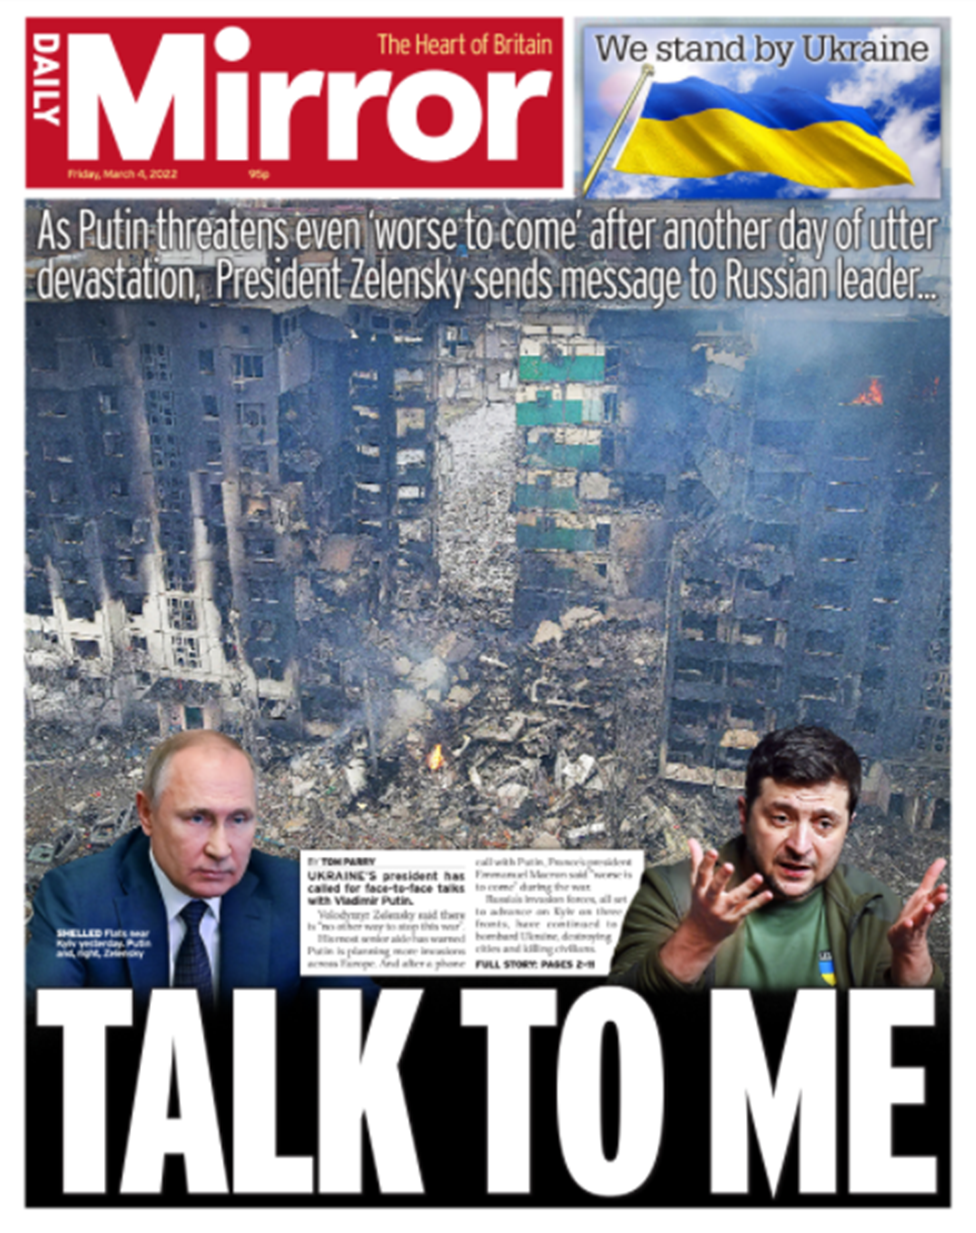 Daily Mirror front page 04/03/22